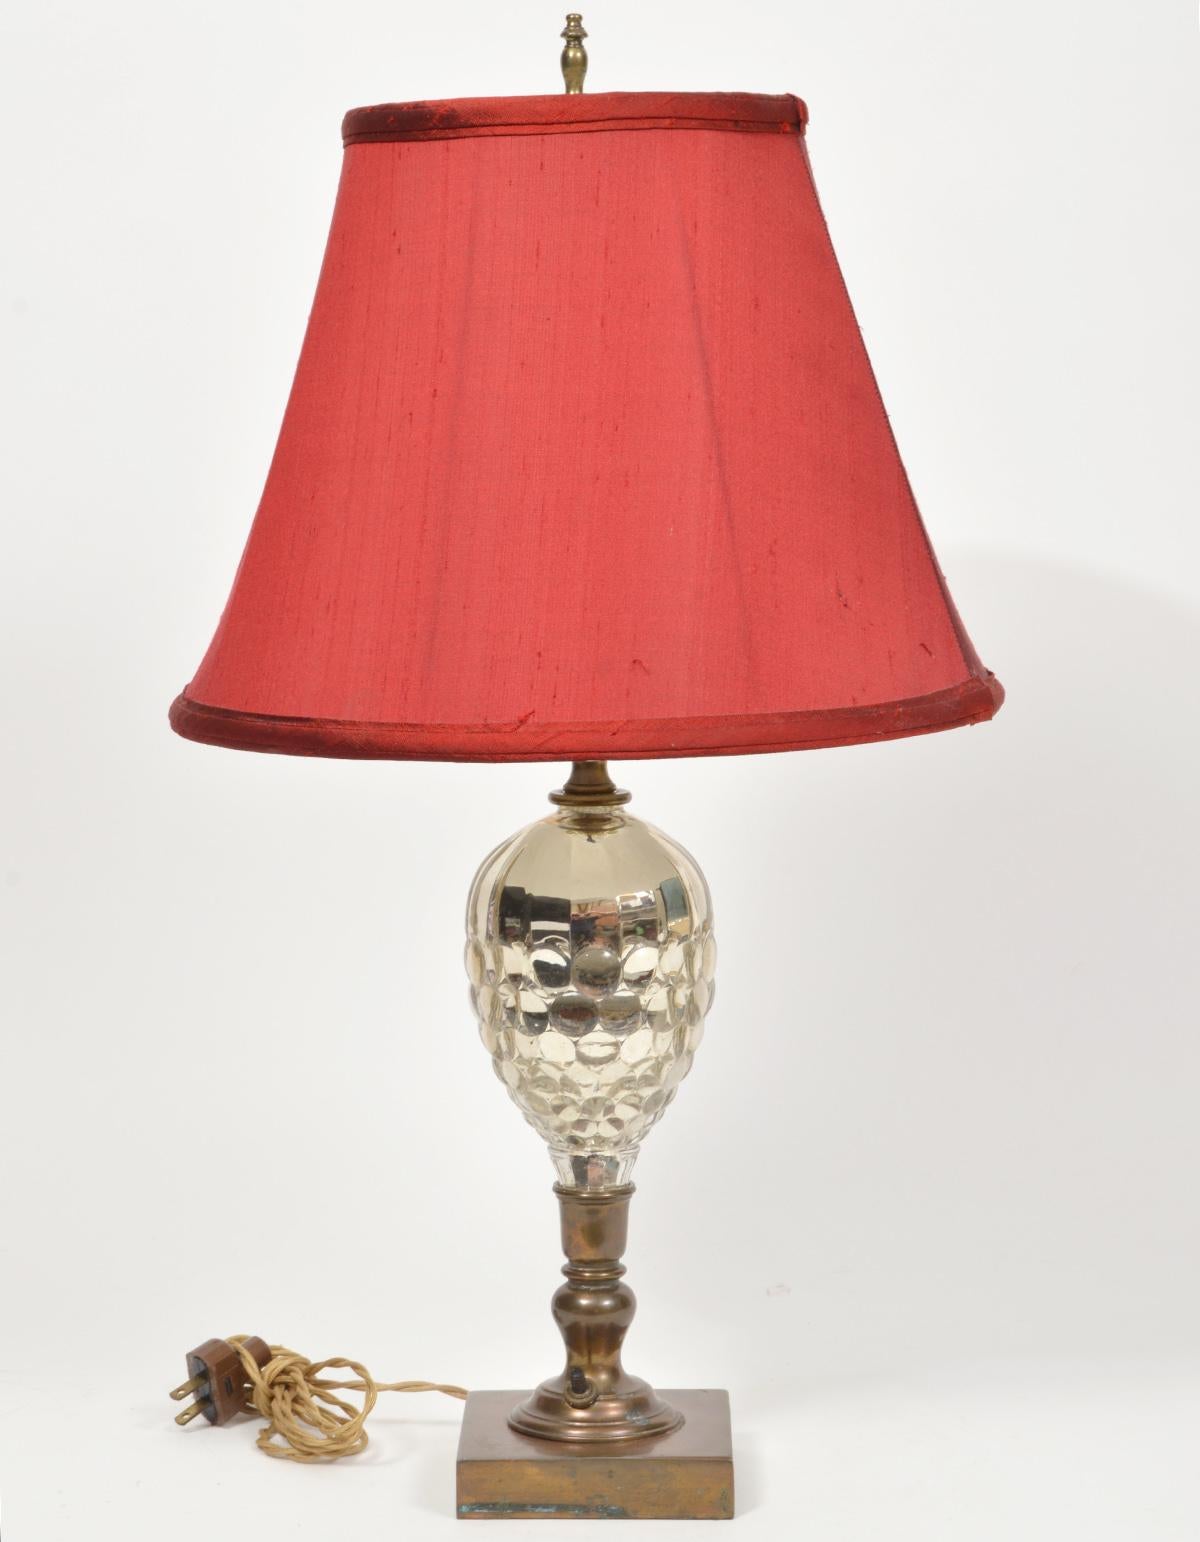 Mounted on patinated bronze bases and stems the pine cone shaped cut mercury glass gracefully reflect the light. These French table lamps likely date to the first half of the 20th century and come with the red shades shown.